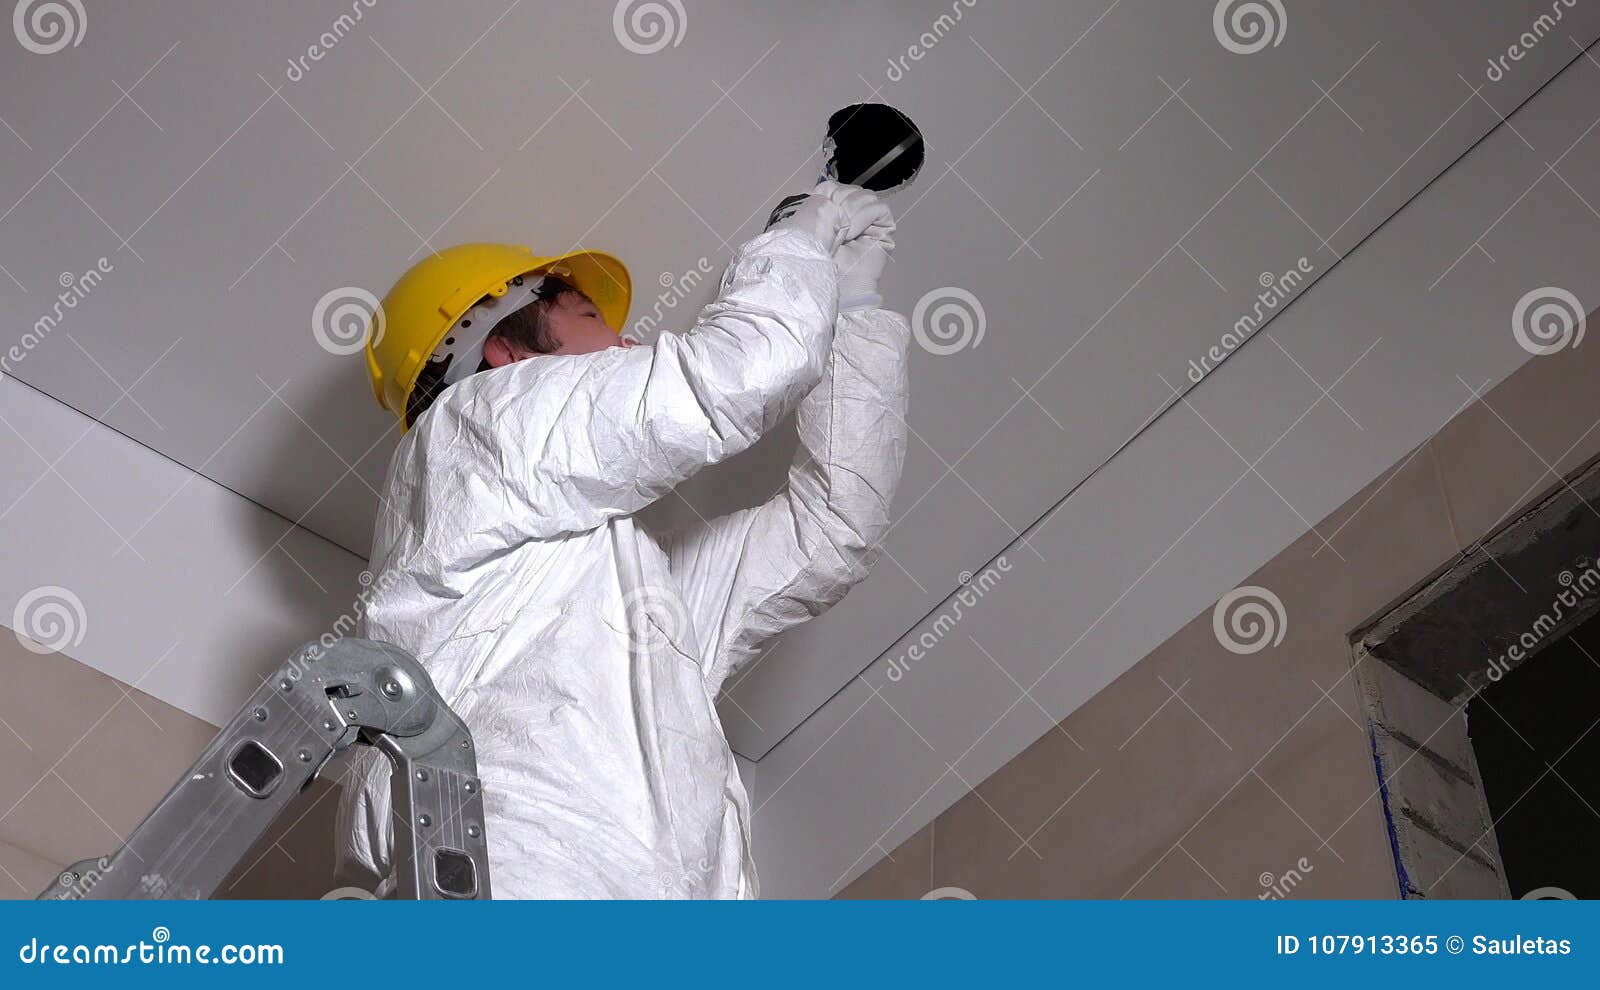 Male Worker With Helmet Cut Holes In Plasterboard Ceiling For Light Installation